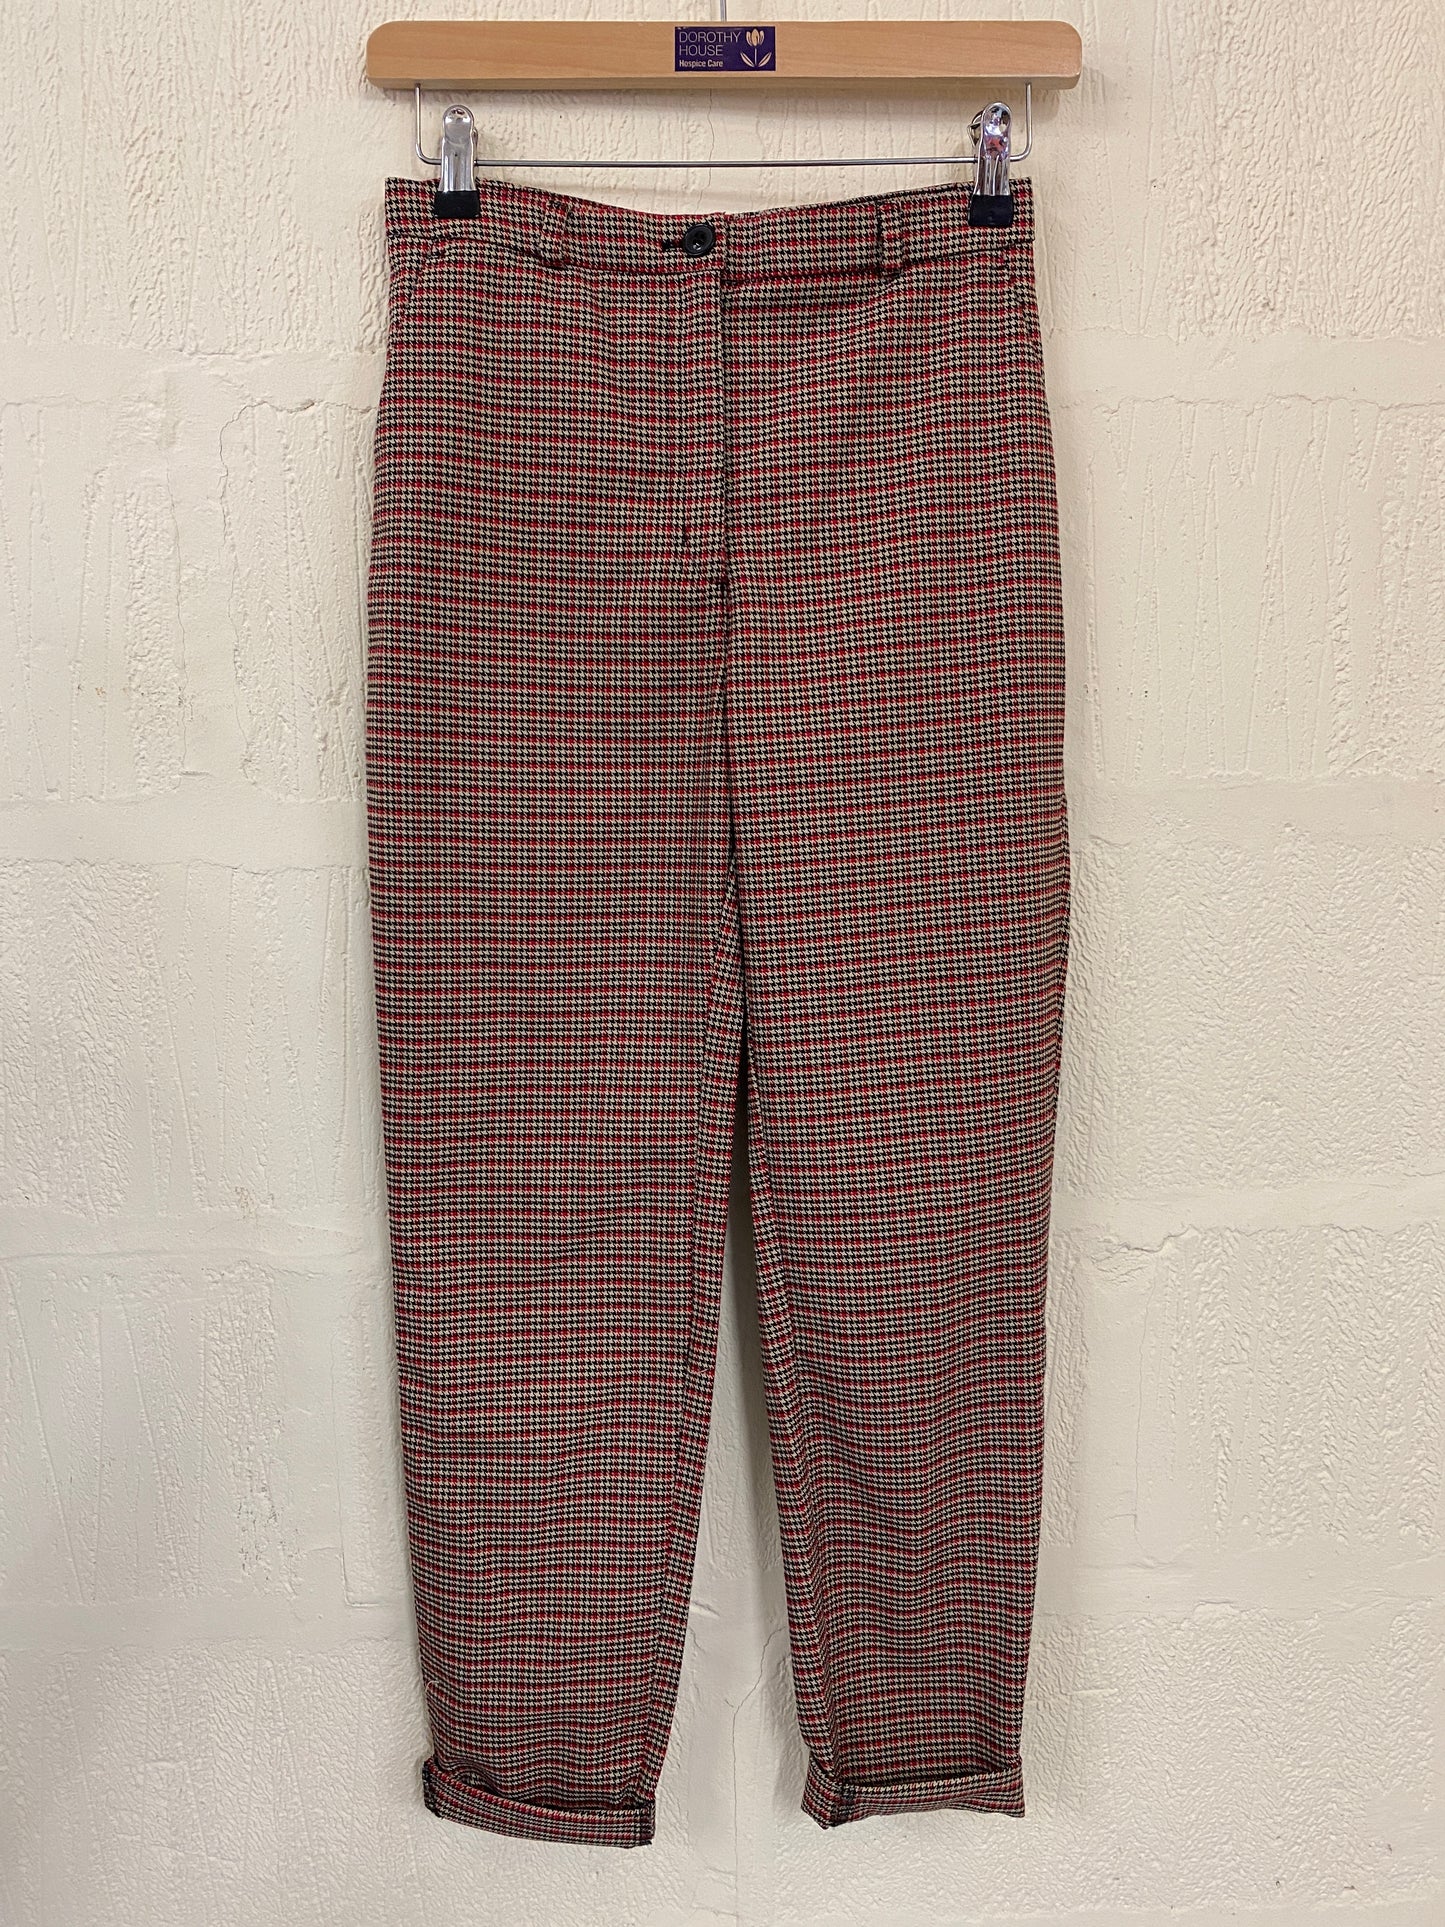 Red & Black Dogtooth Skinny Fit Trousers Size 8